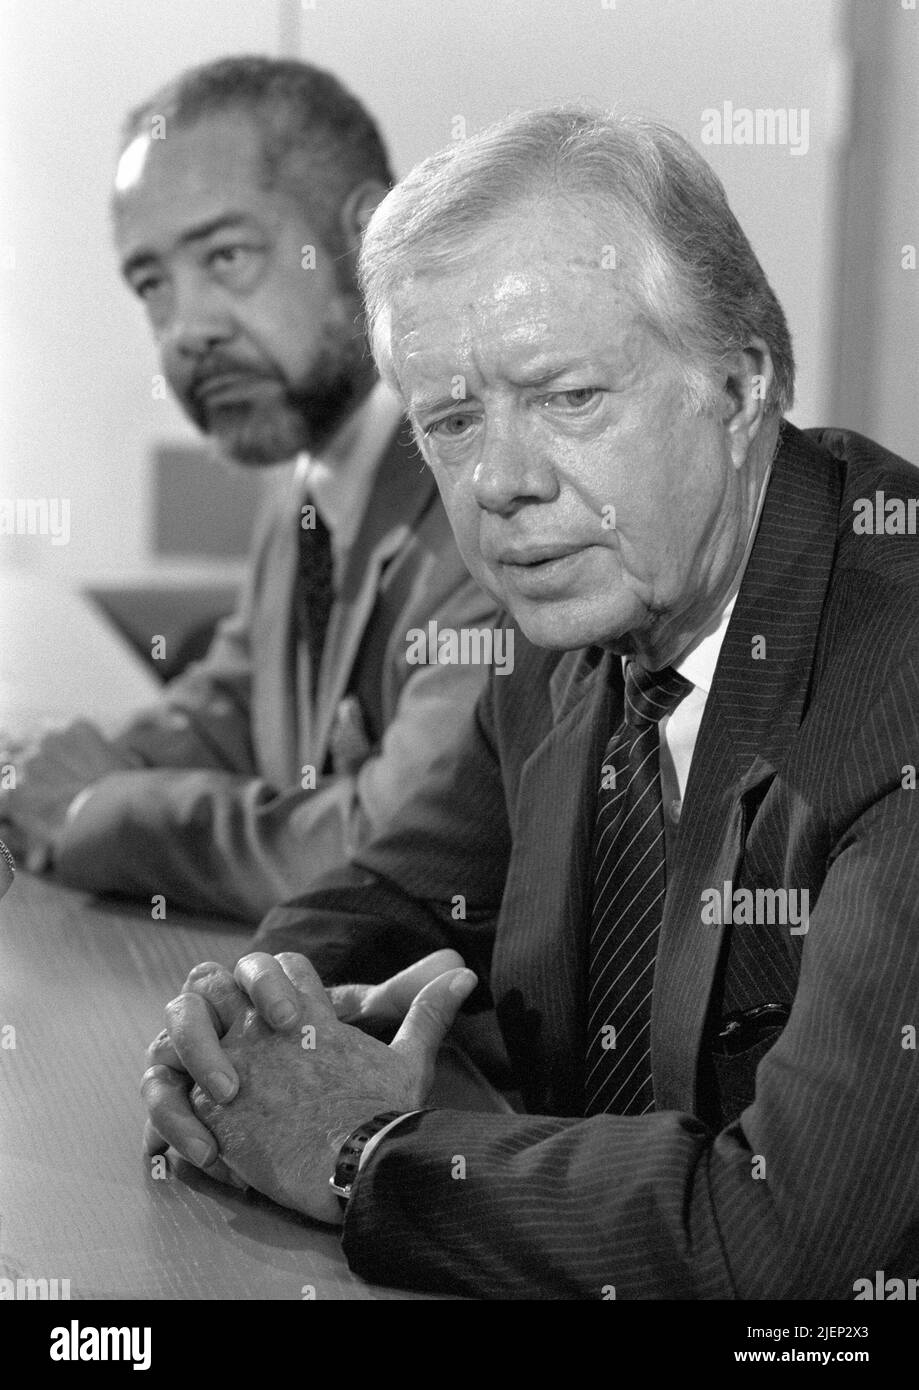 Ex-President of the United States Jimmy Carter at a press conference in the Netherlands at Amsterdam Airport Schiphol on October 6, 1988. Stock Photo